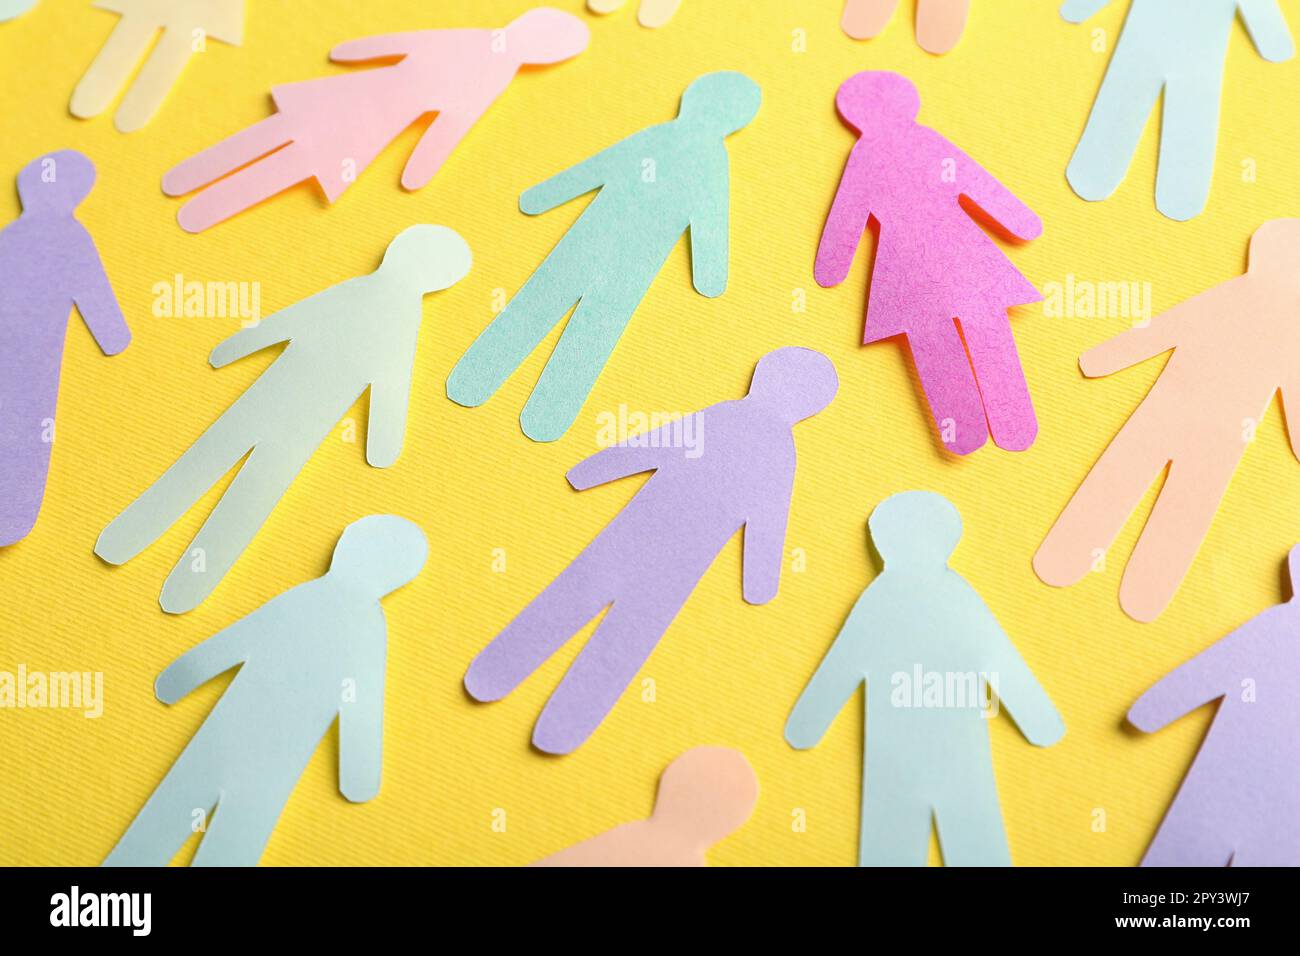 Many different paper human figures on yellow background. Diversity and inclusion concept Stock Photo